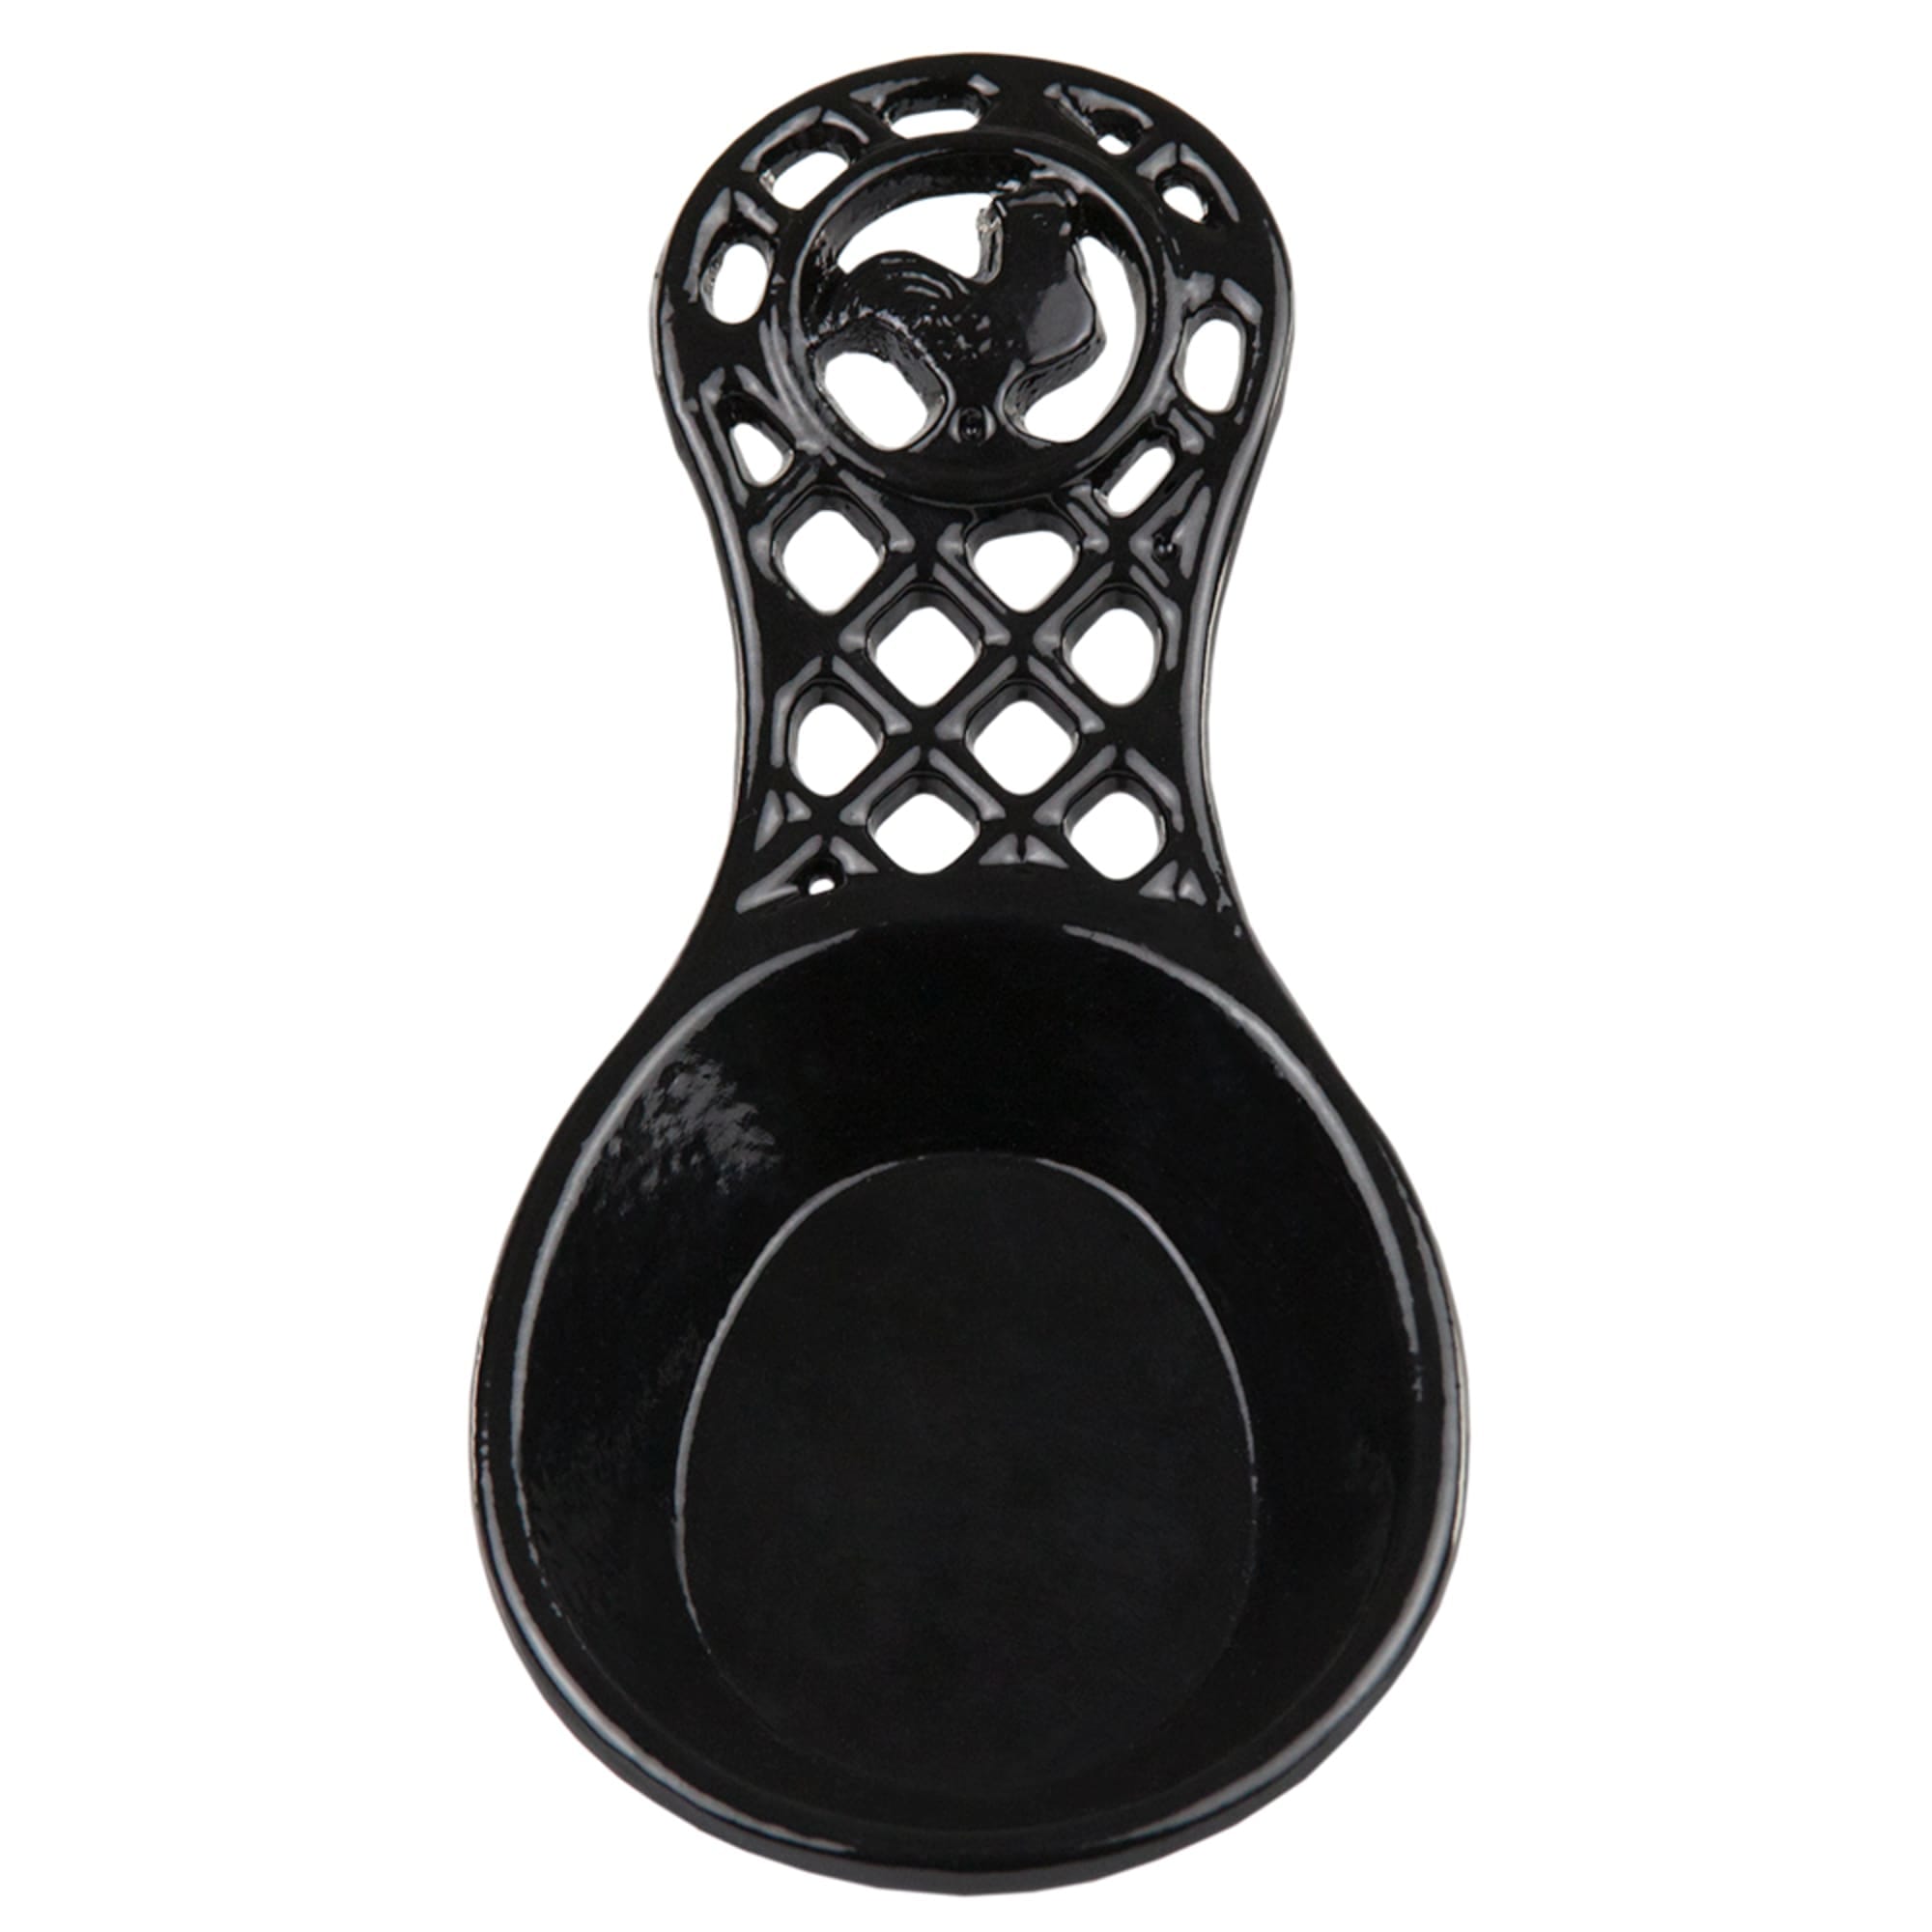 Home Basics Cast Iron Rooster Spoon Rest, Black $4.00 EACH, CASE PACK OF 6